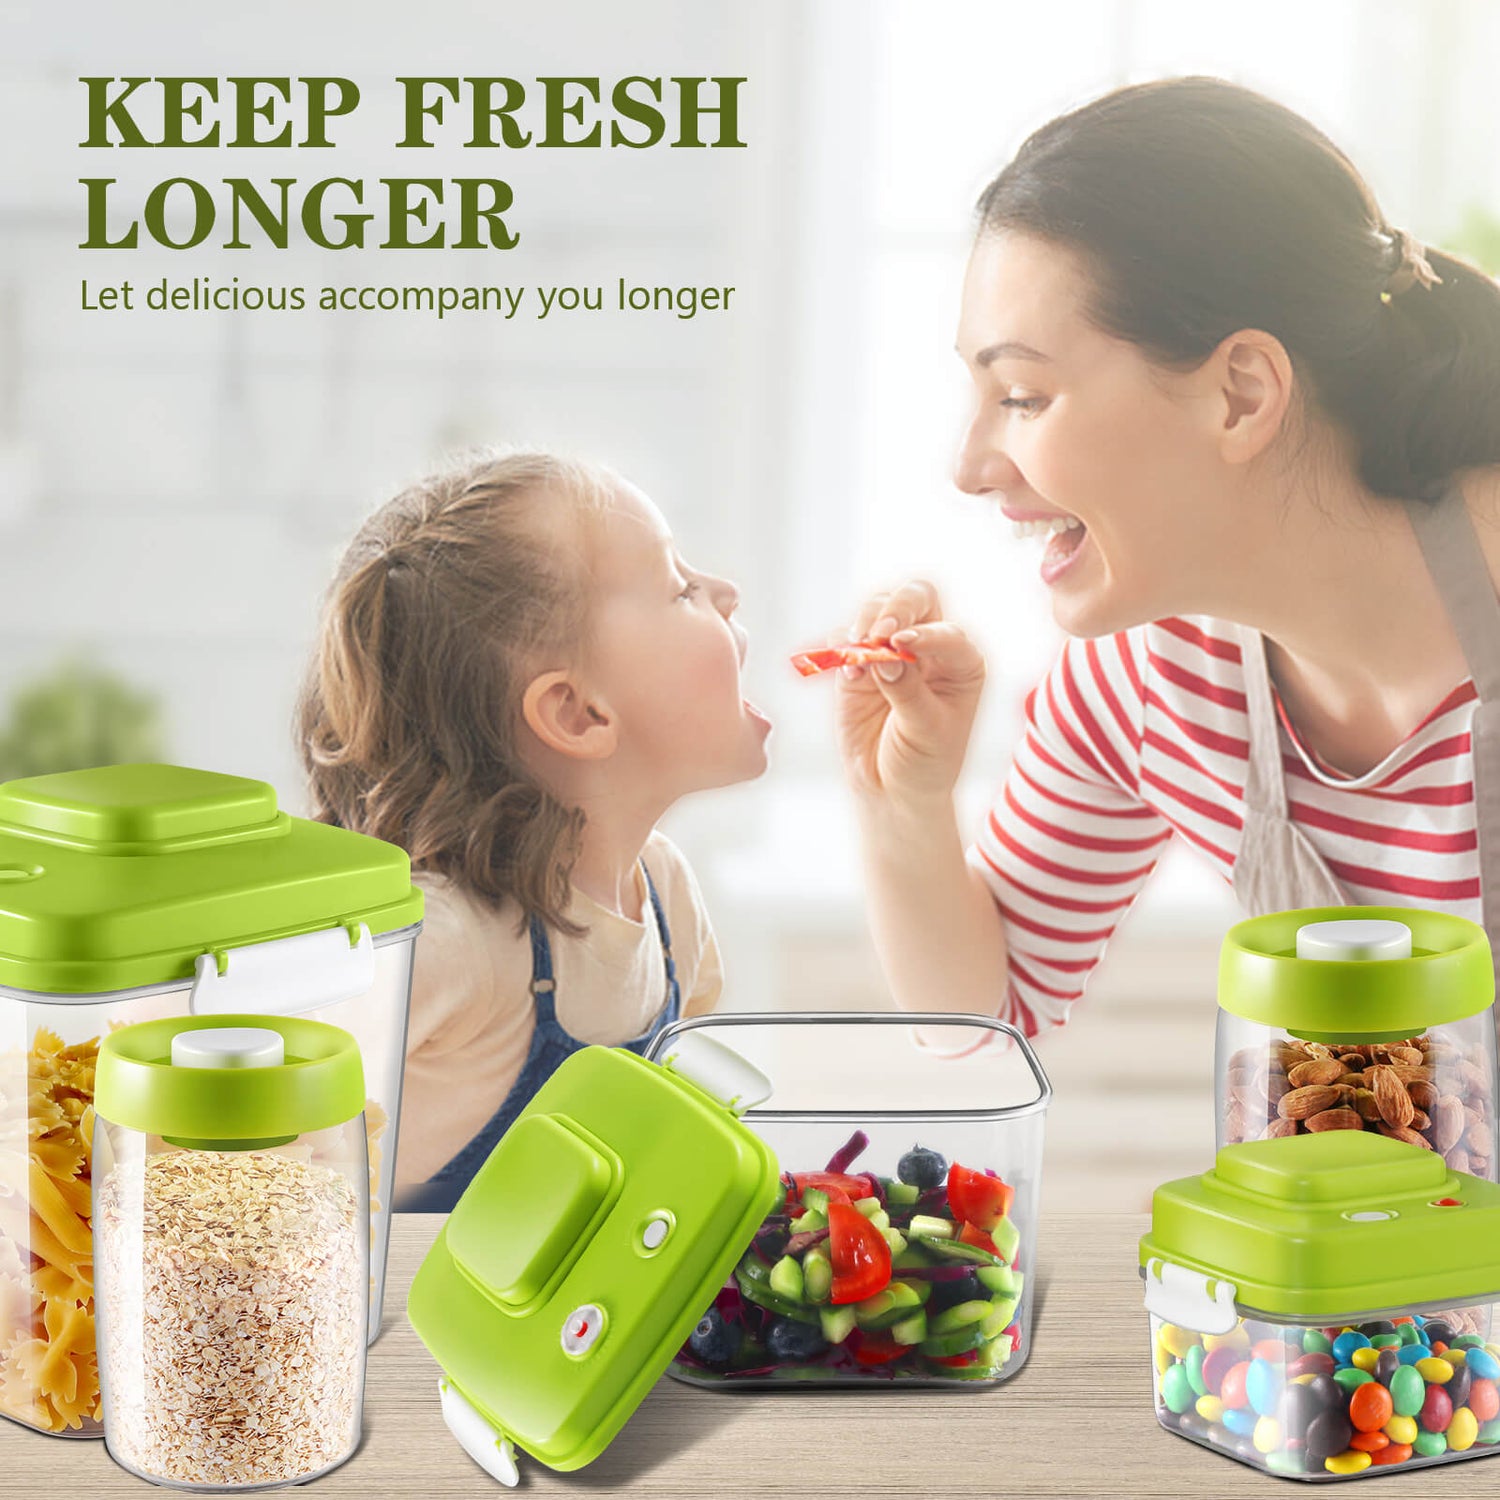 Airtight Food Storage Containers 36-Piece Set, Kitchen & Pantry